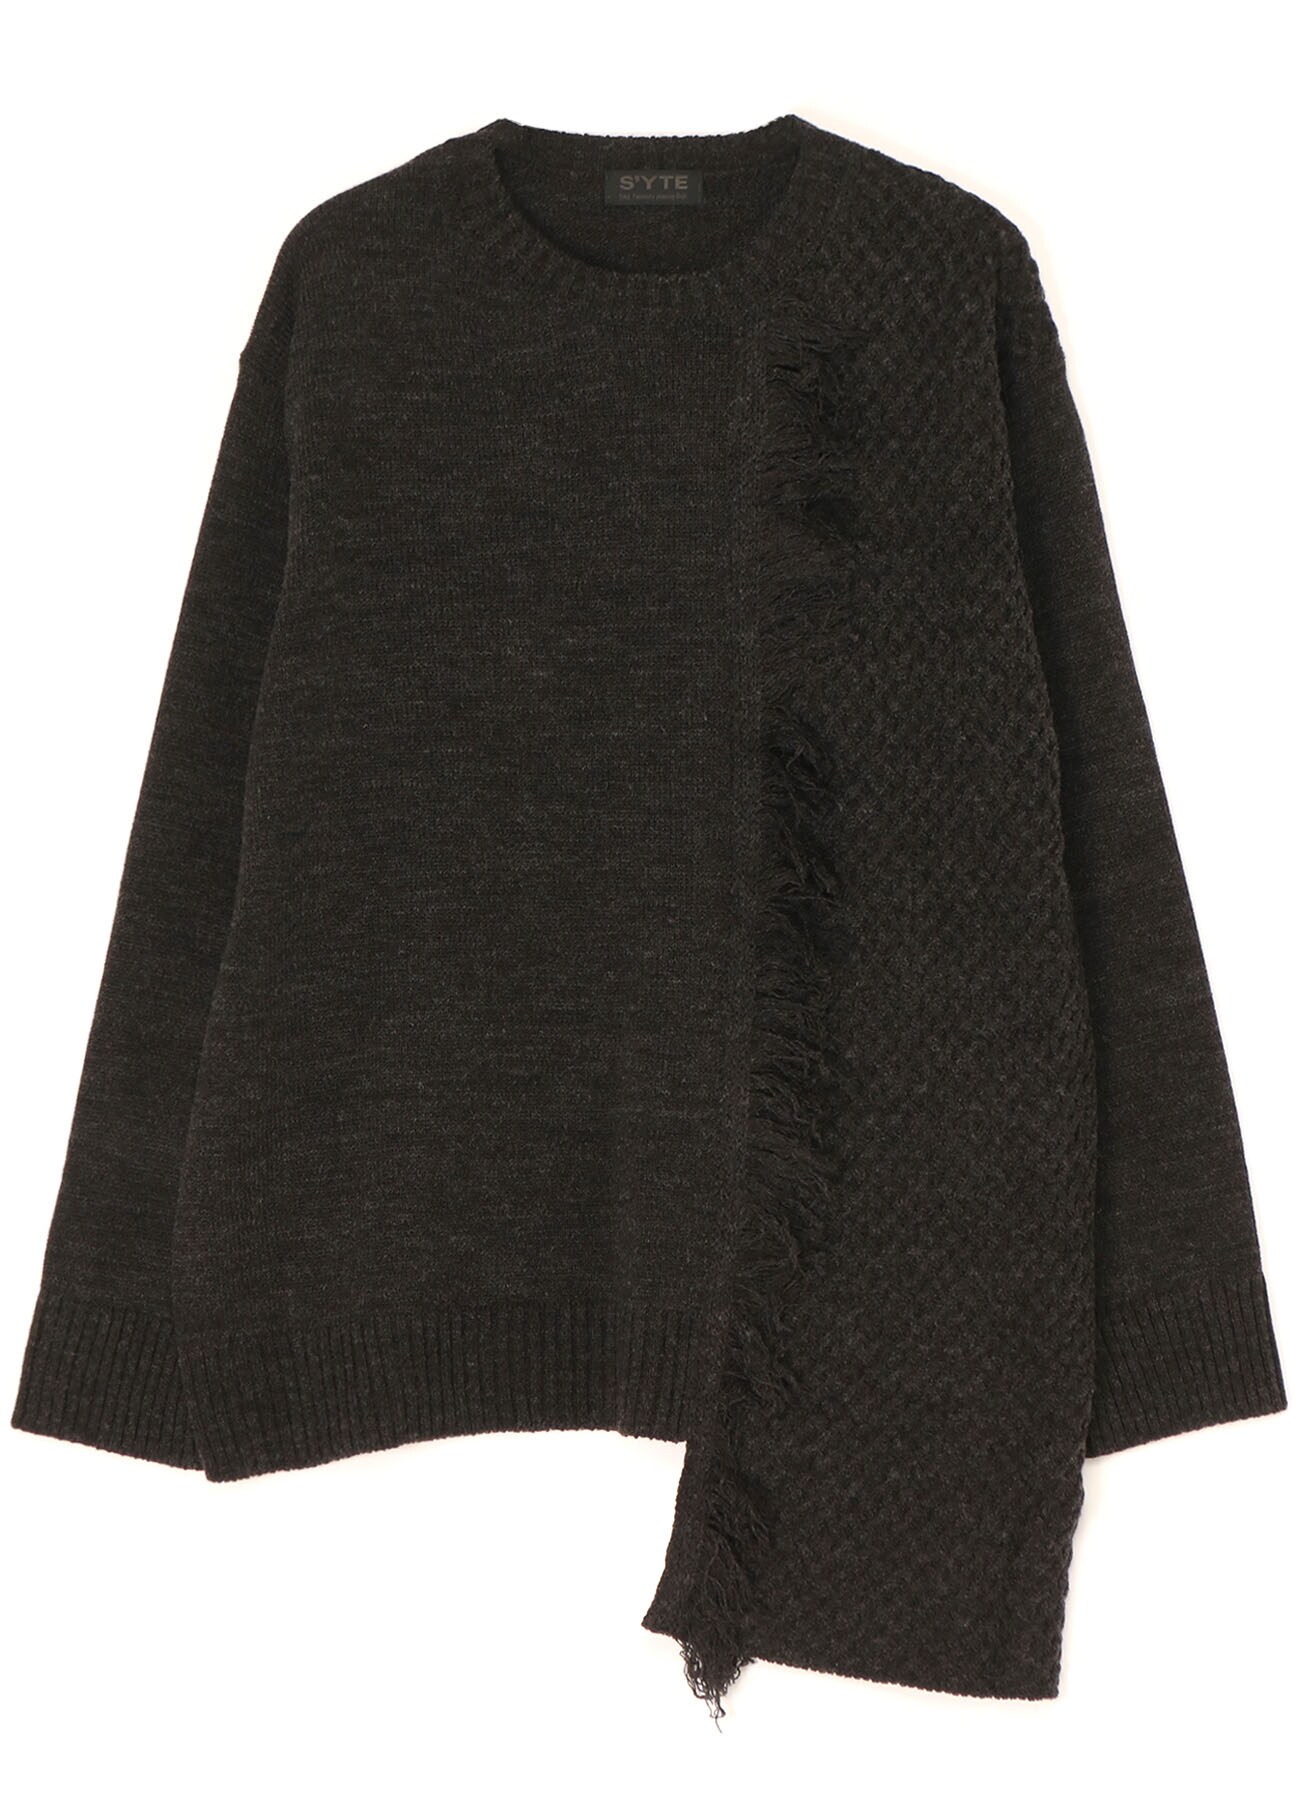 ASYMMETRICAL DESIGN KNIT WITH FRINGE DETAIL SWITCHED TO JACQUARD 